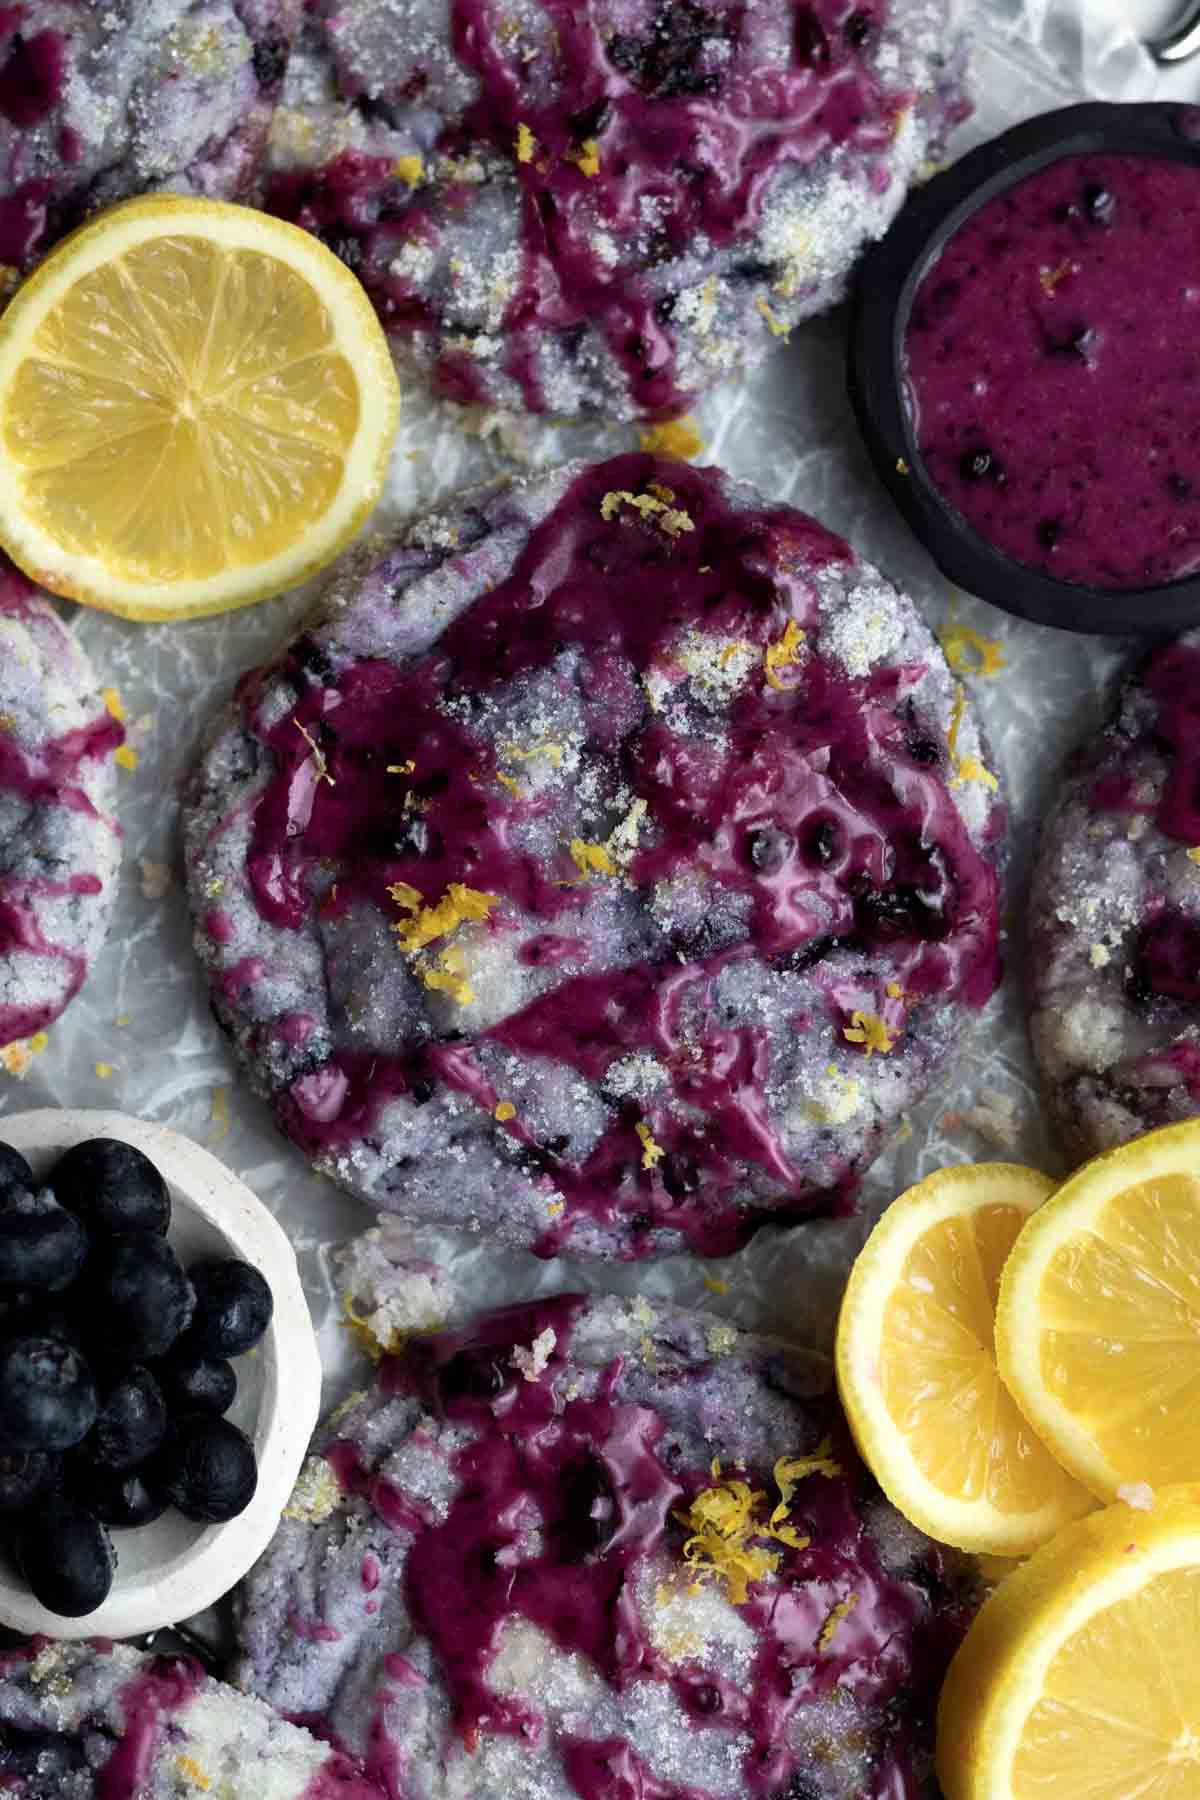 Vibrant purple Lemon Blueberry Cookies covered in sugar and lemon zest drizzled in delicious blueberry glaze.